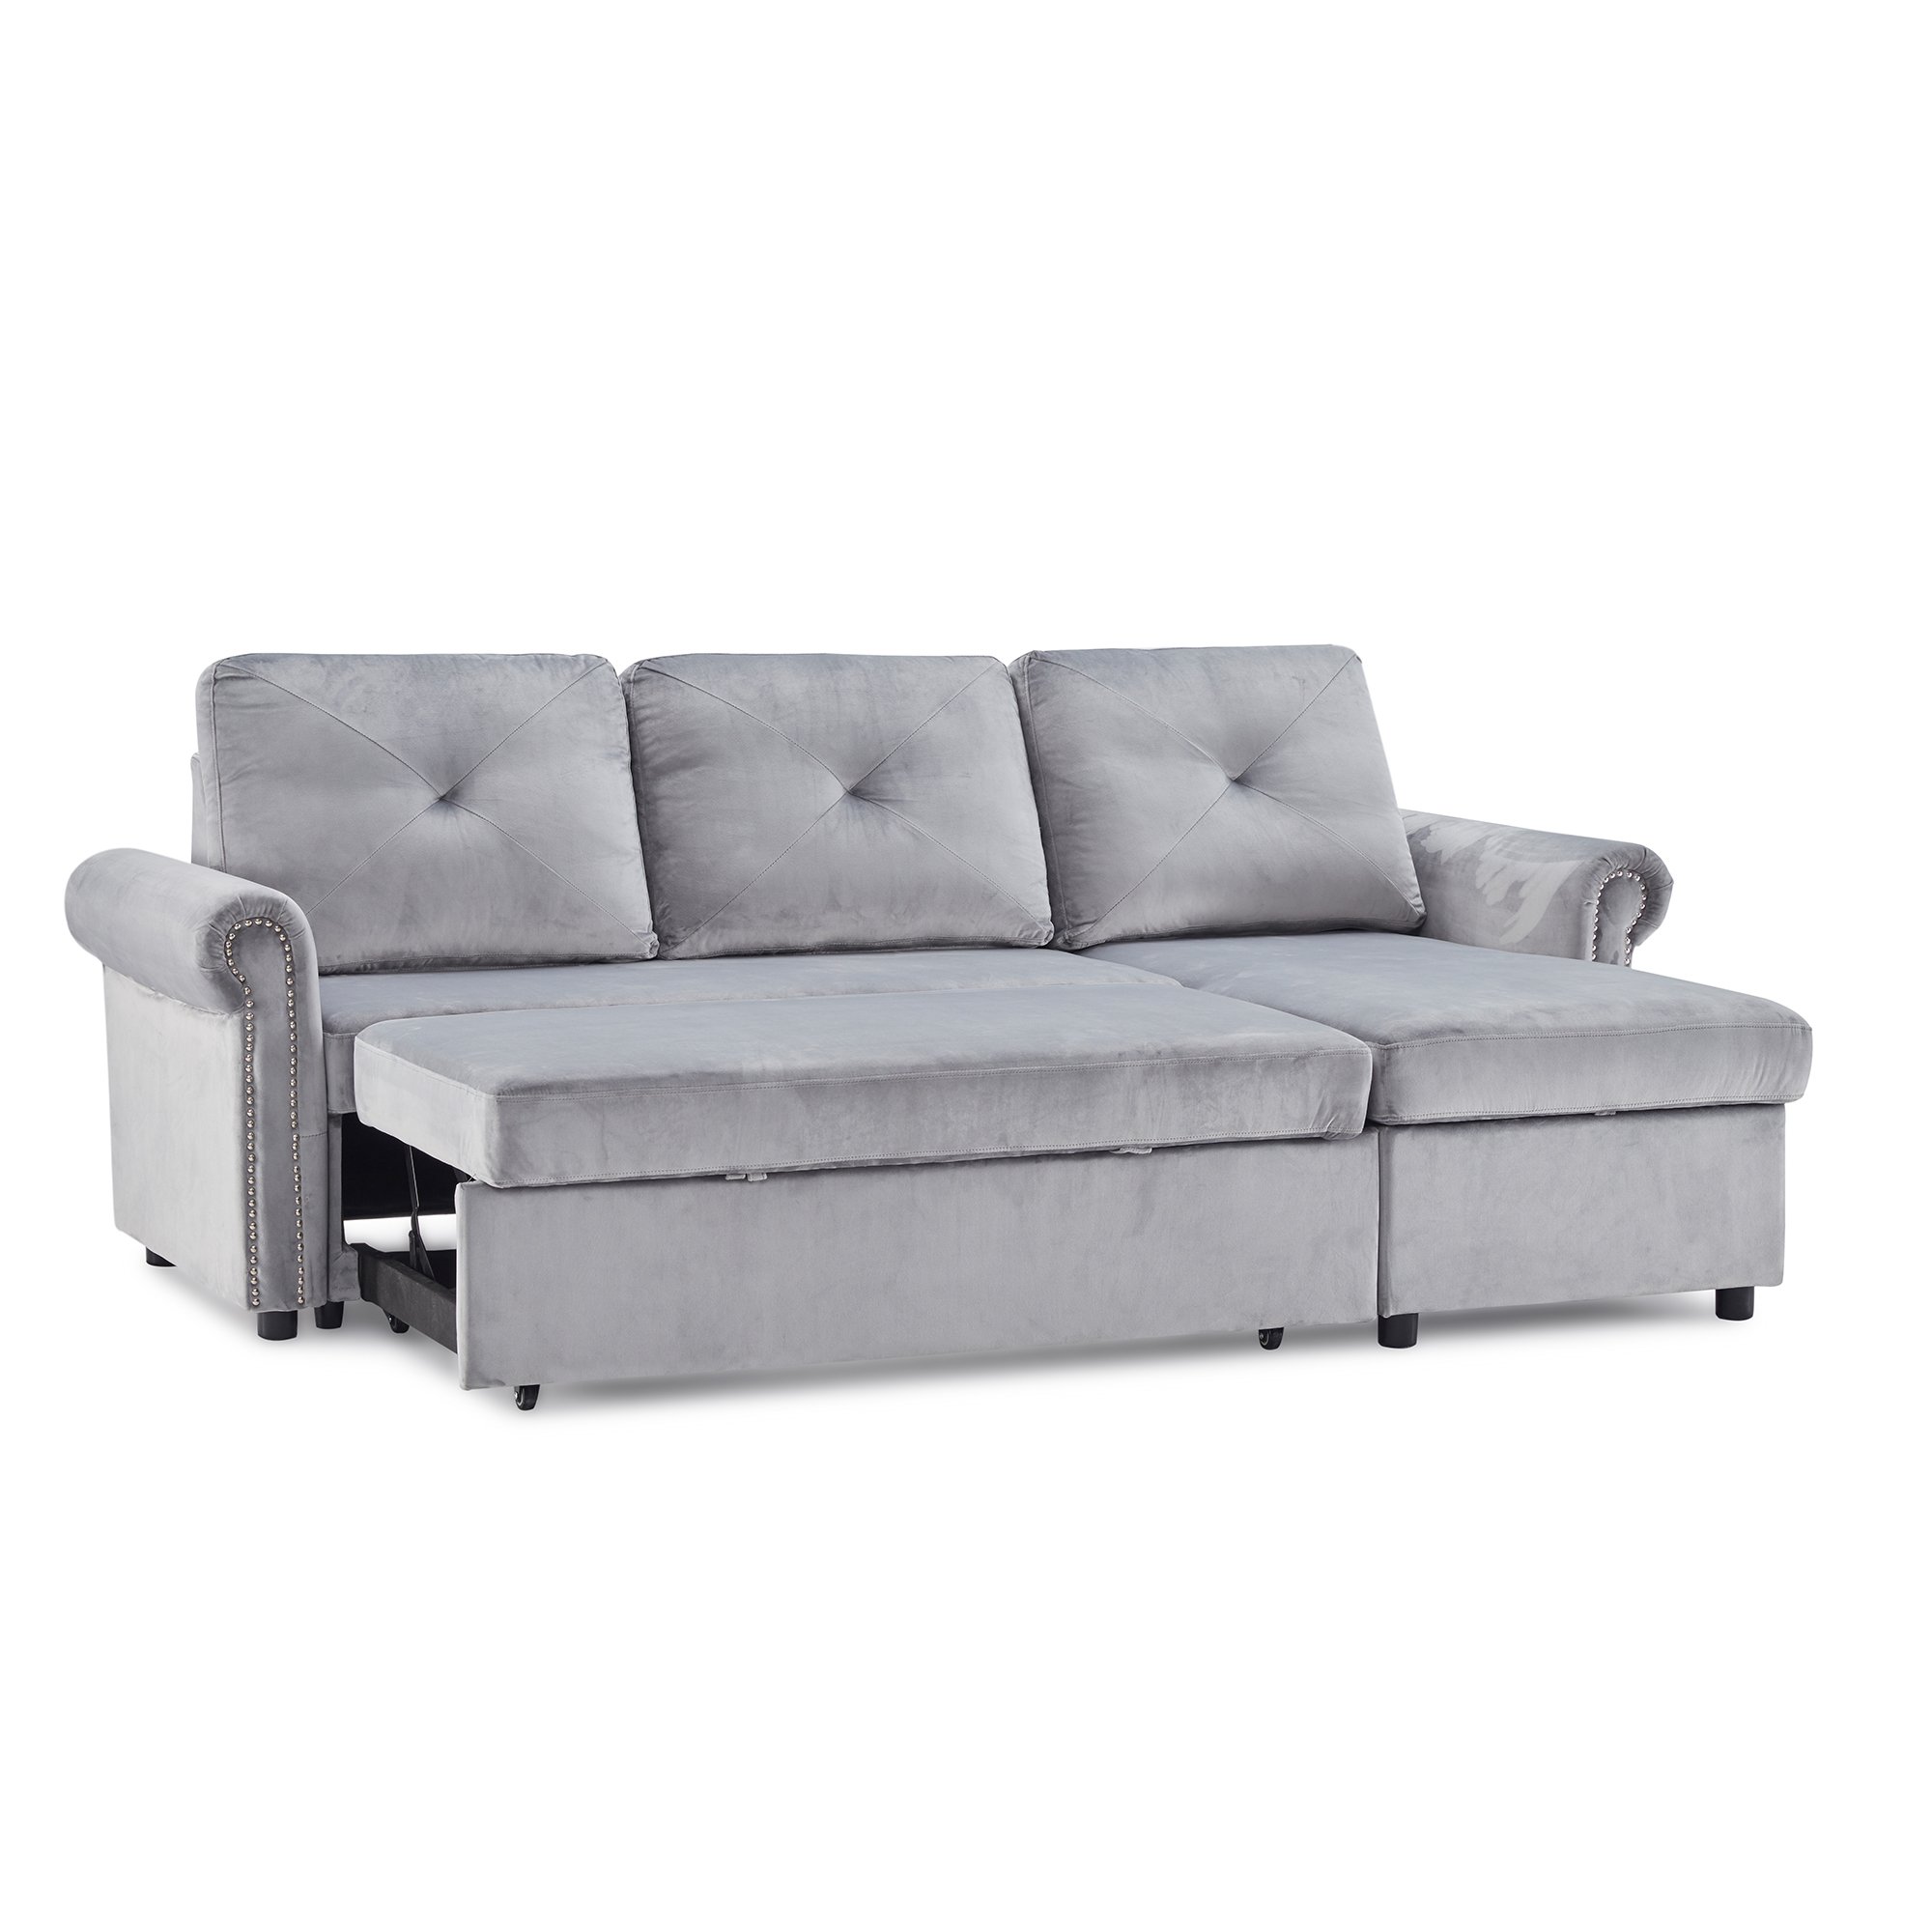 83" 3-Seater Sleeper Sofa Bed Convertible Sectional Sofa Couch with Storage-CASAINC